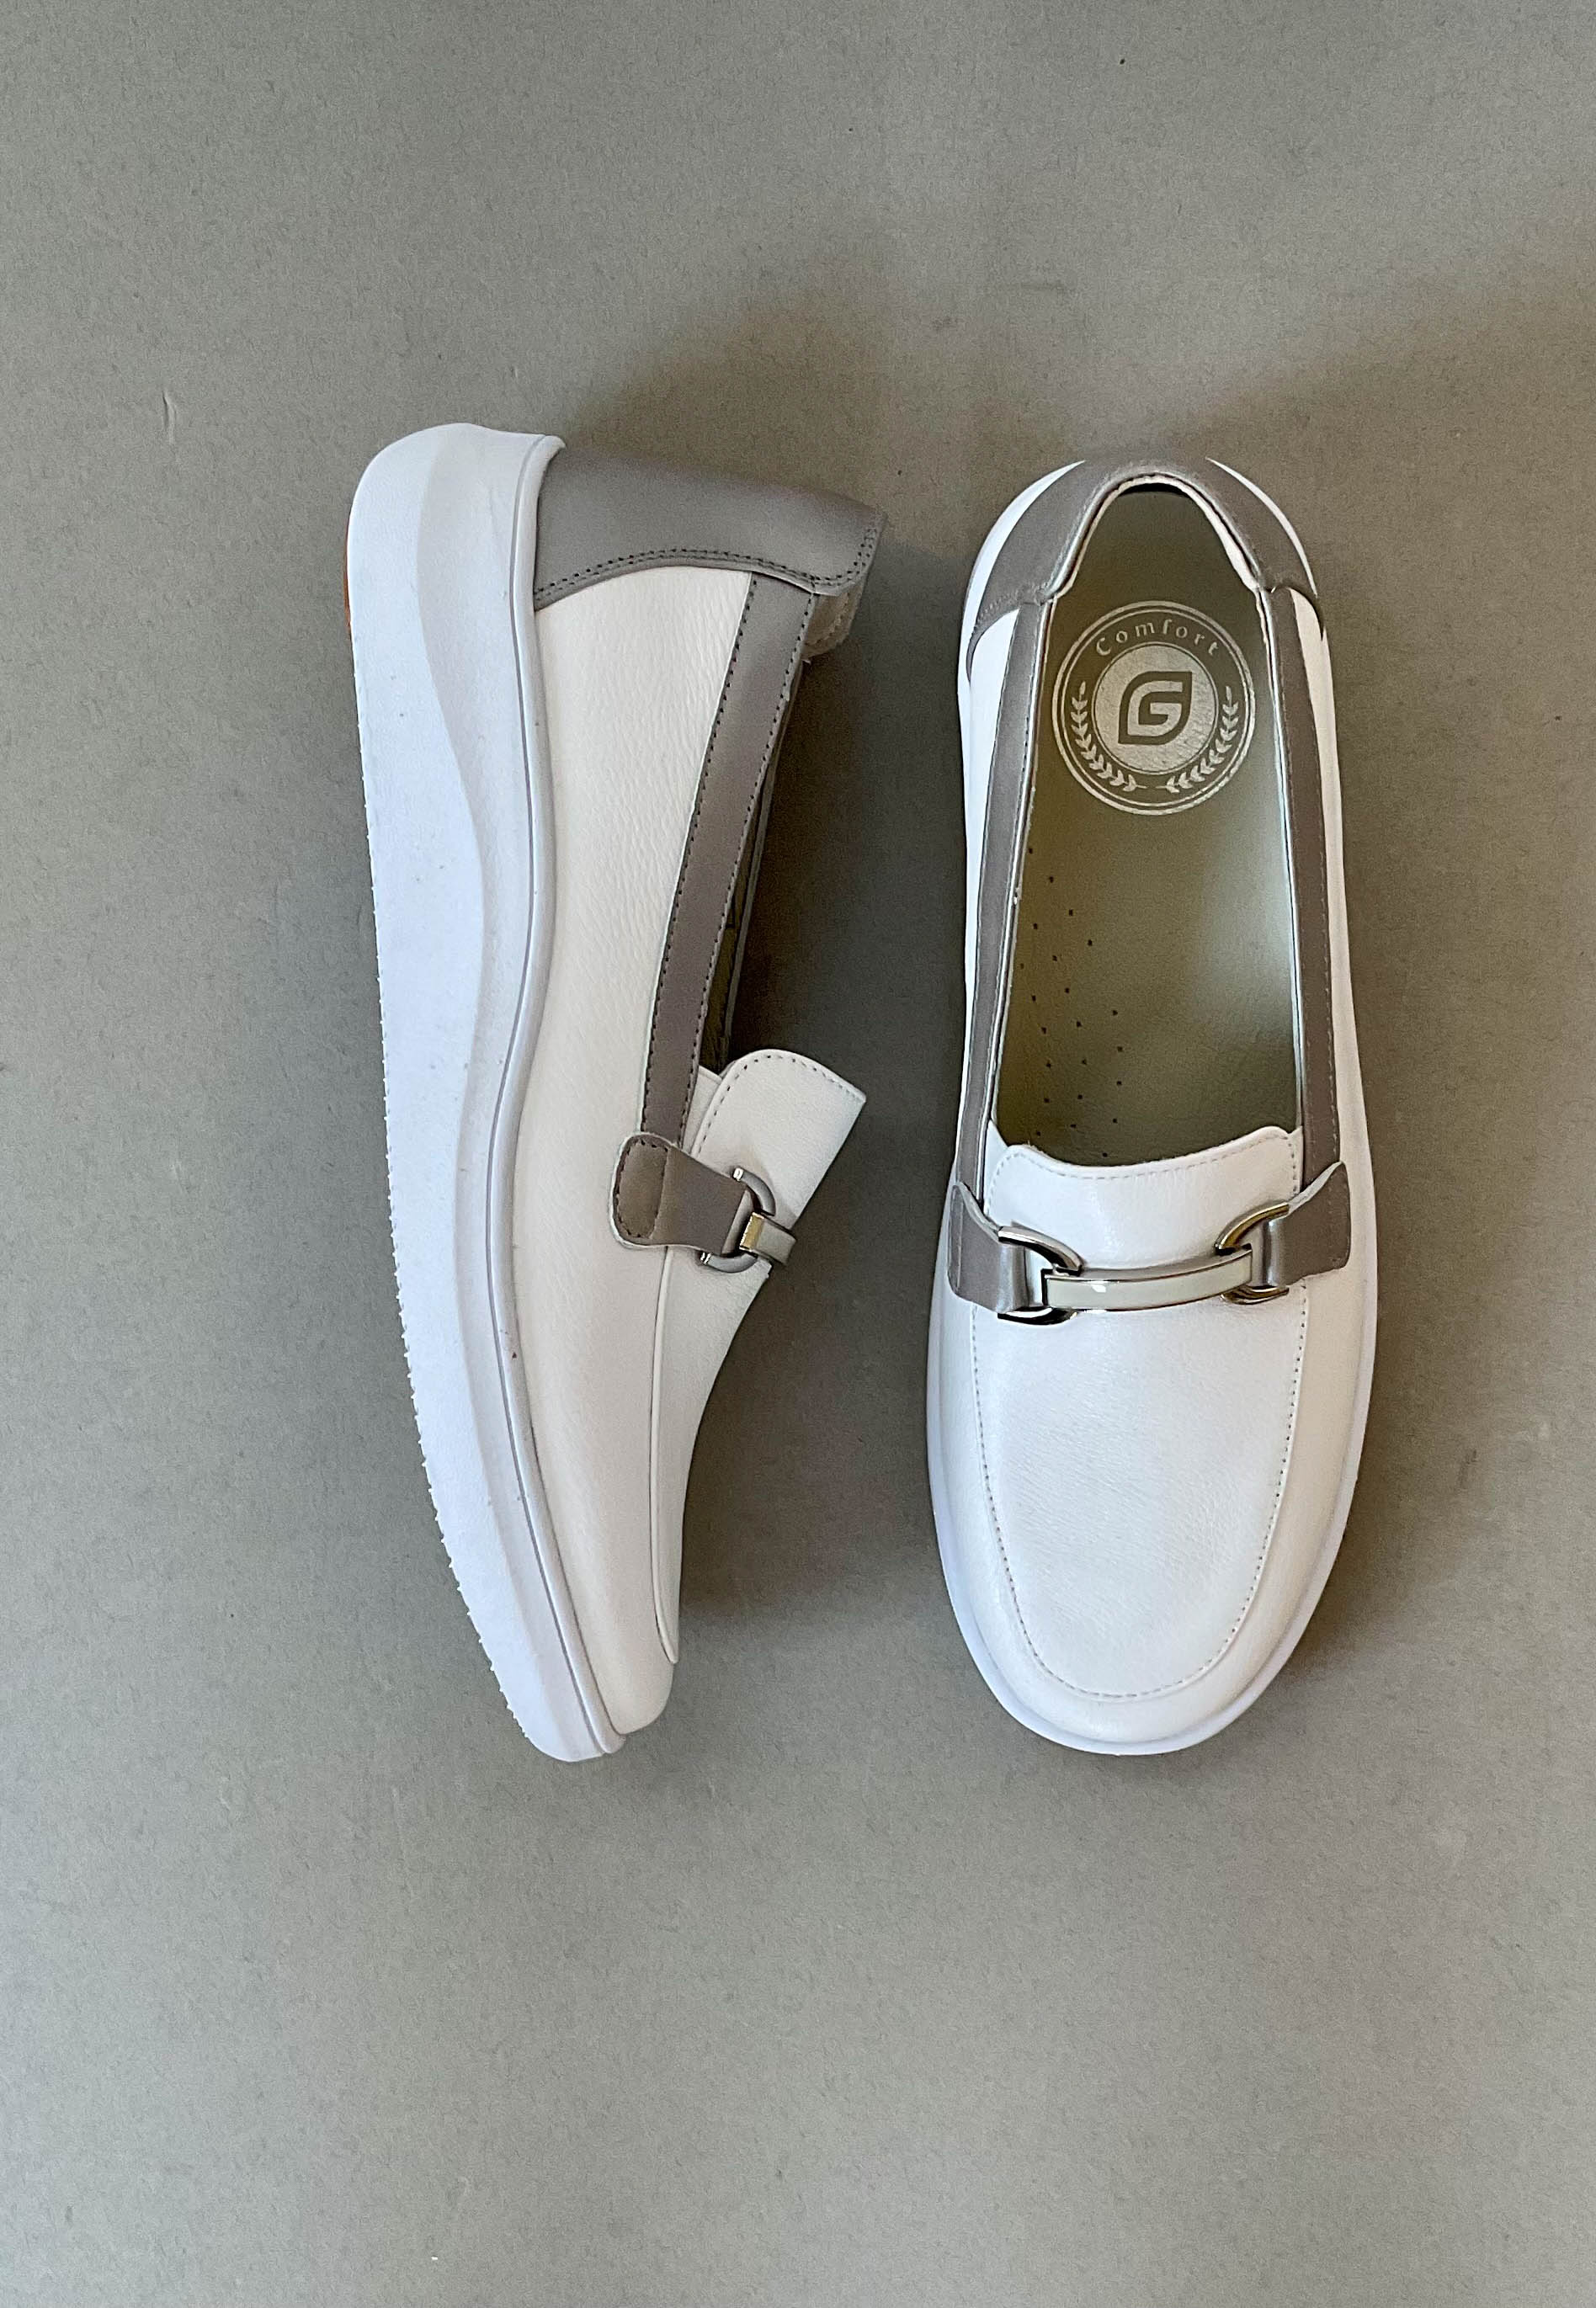 G comfort white shoes